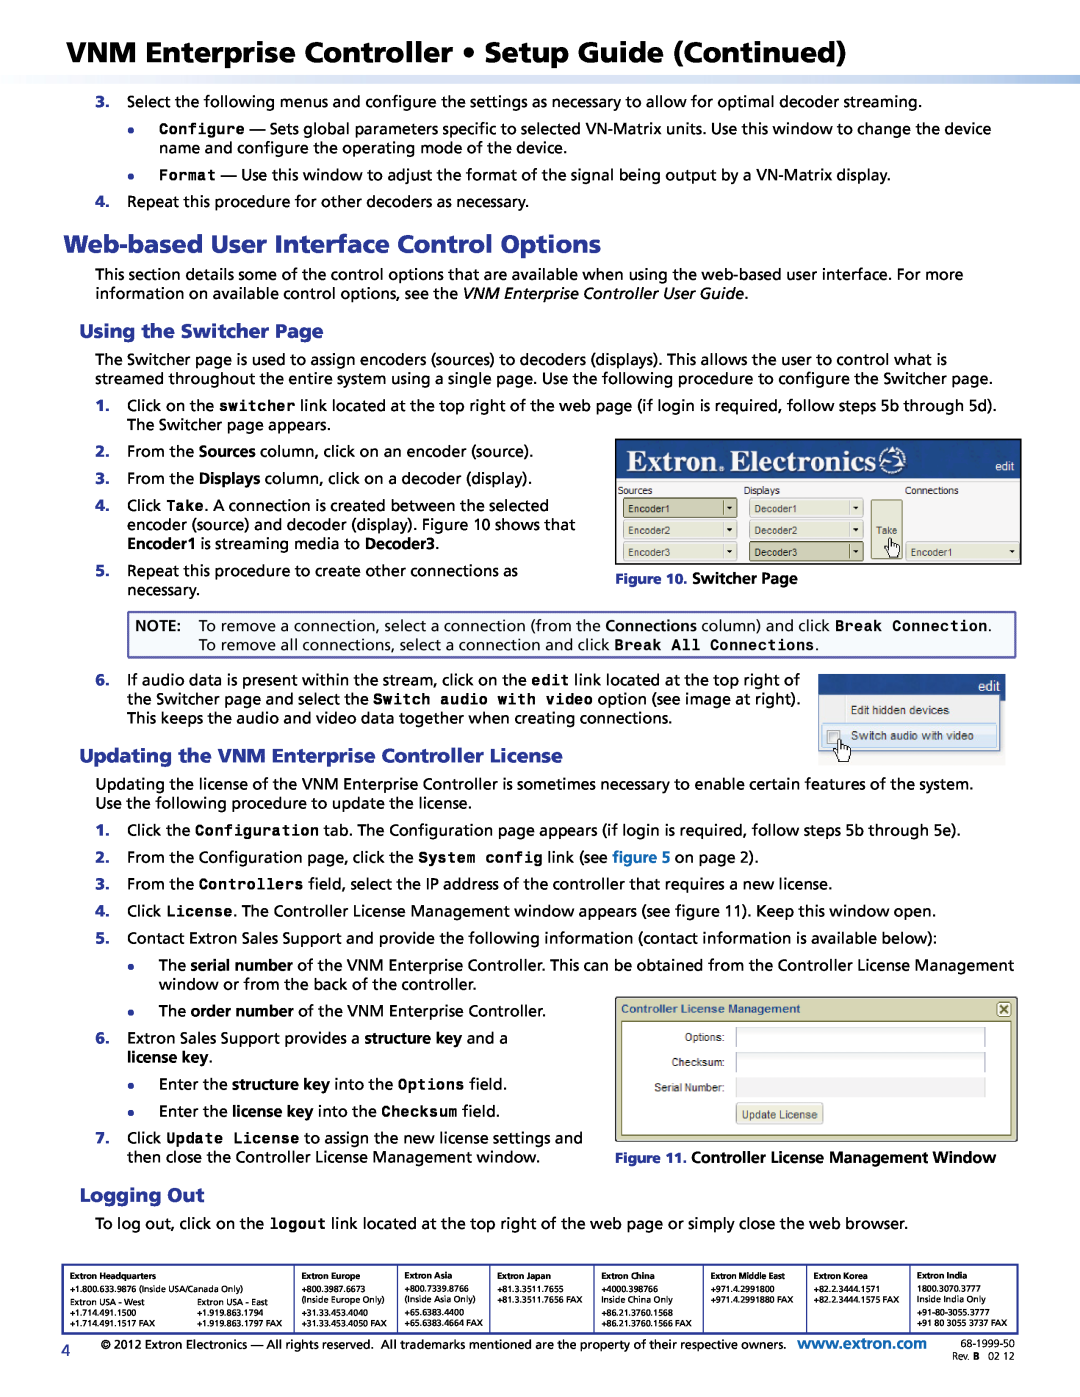 Extron electronic 325, 225 Web-based User Interface Control Options, VNM Enterprise Controller Setup Guide Continued 